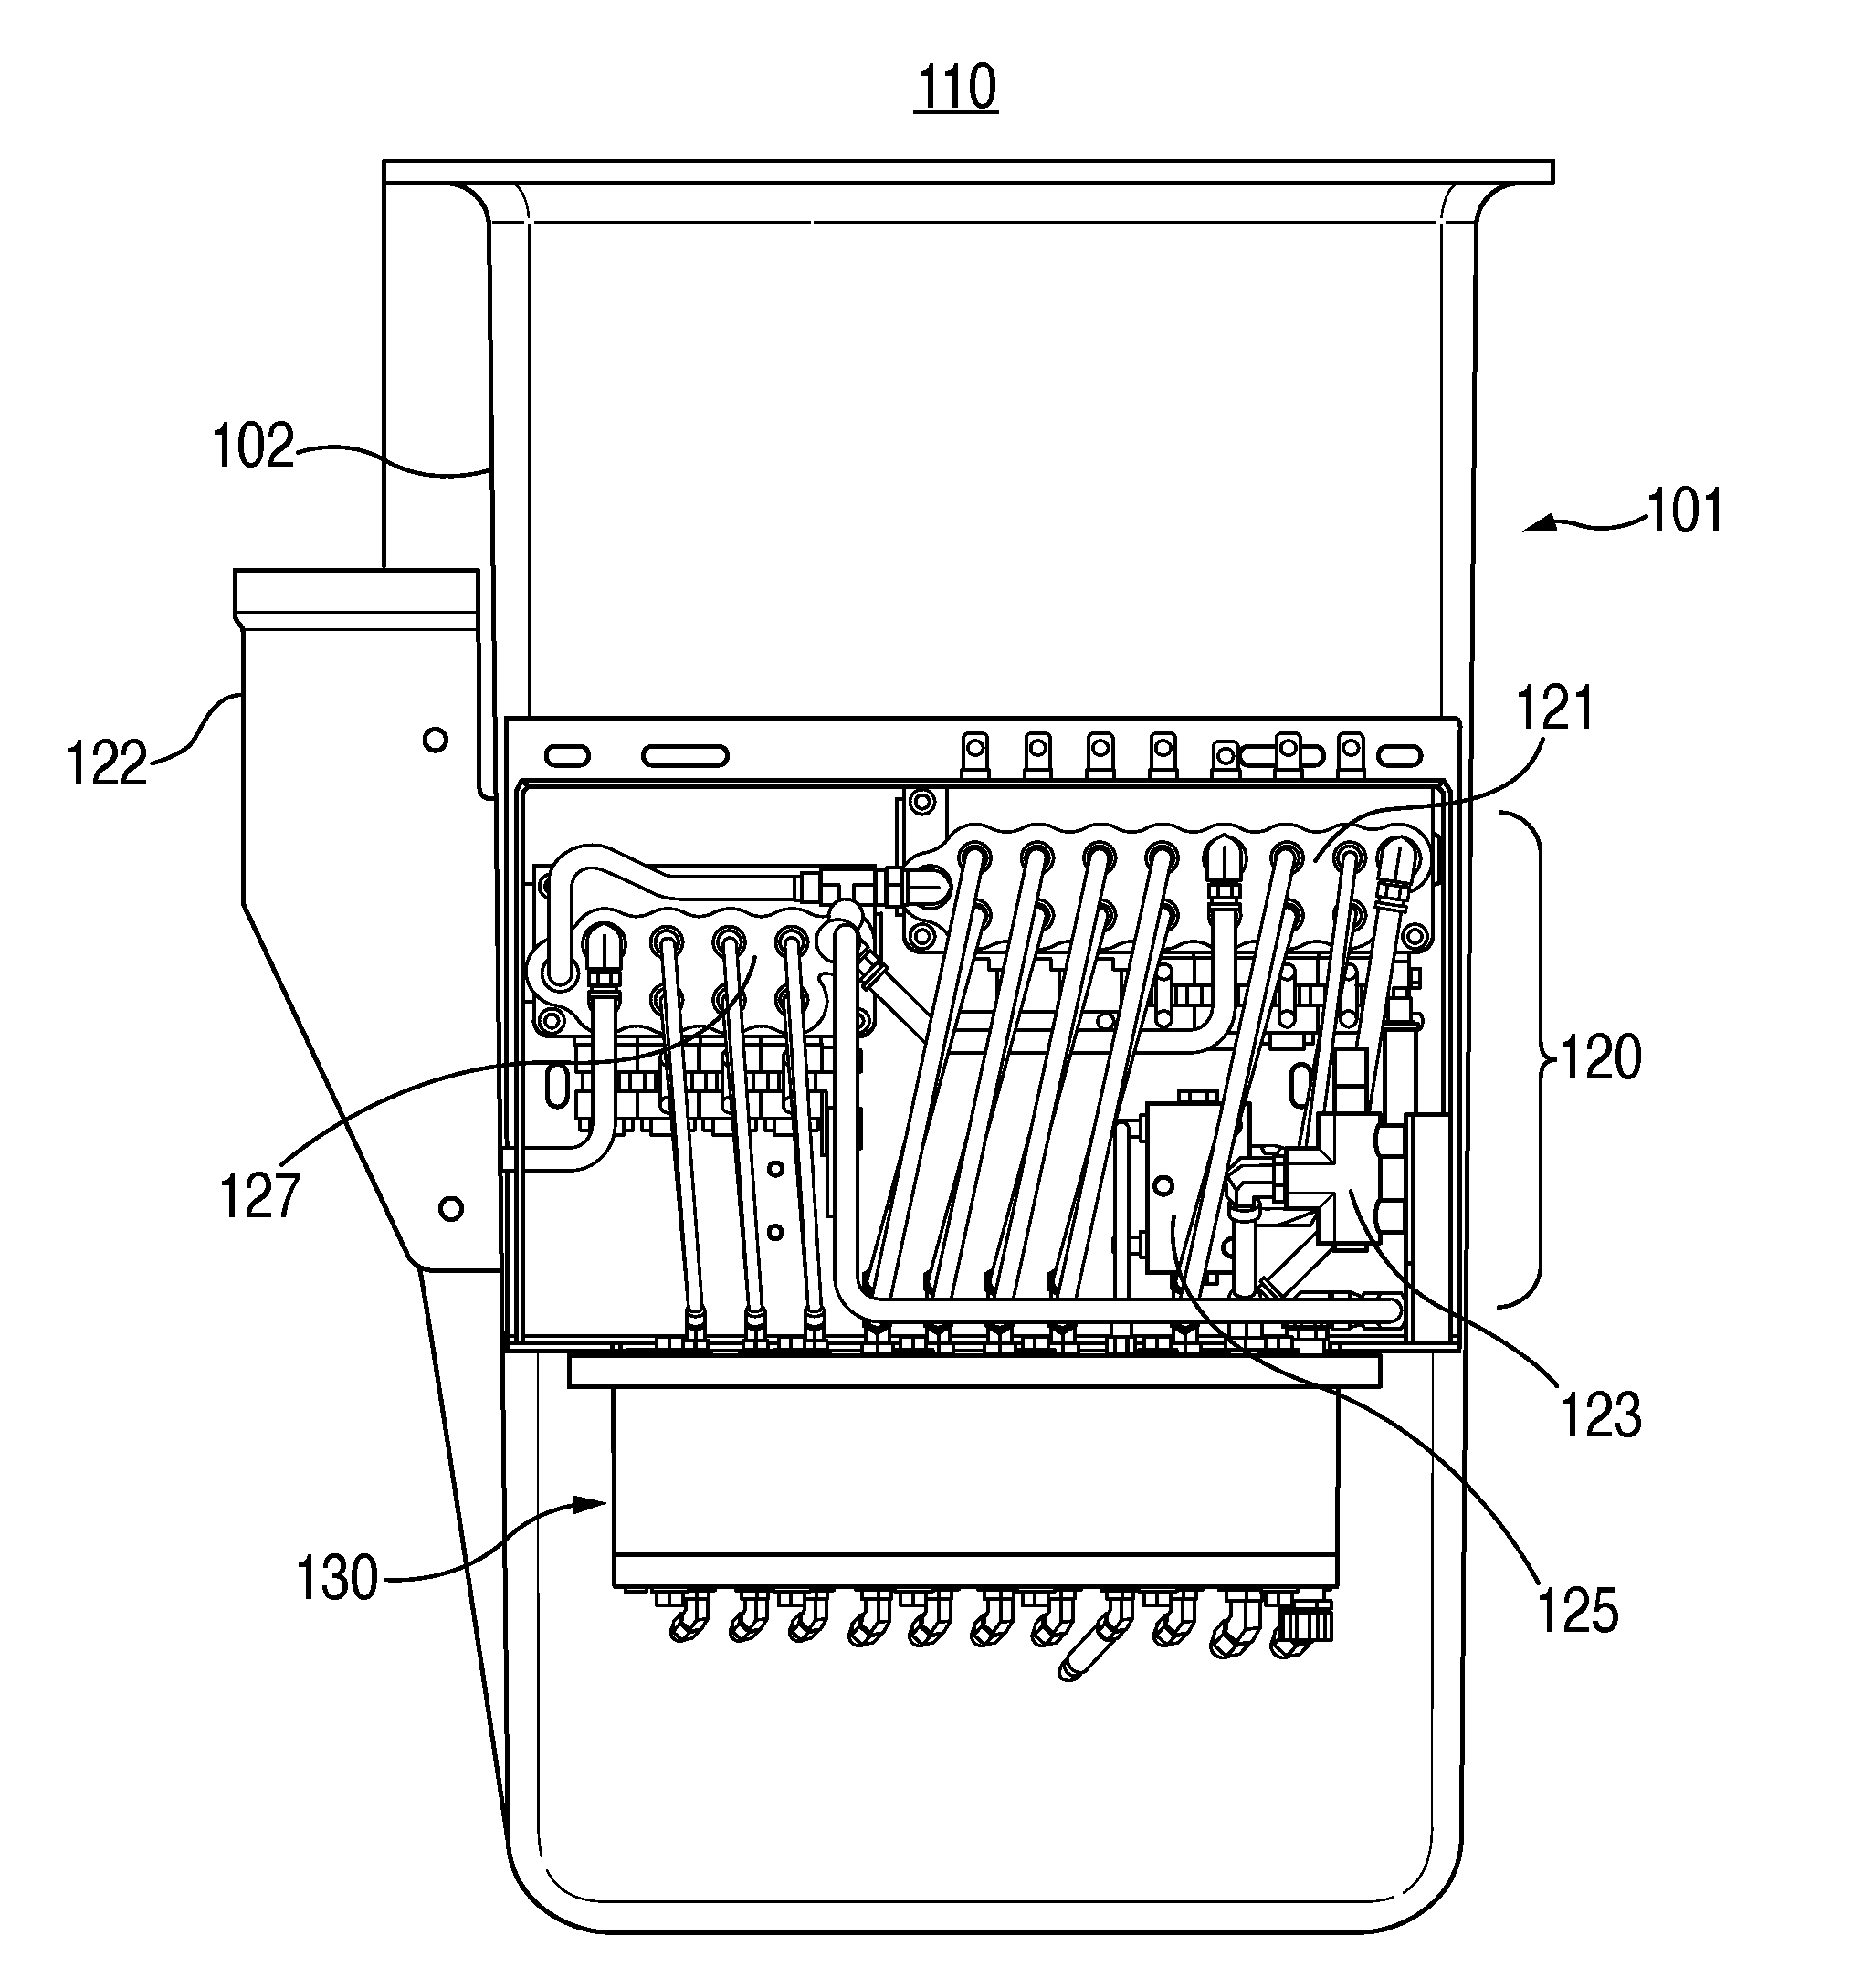 Apparatuses and methods for providing high electrical resistance for aerial work platform components